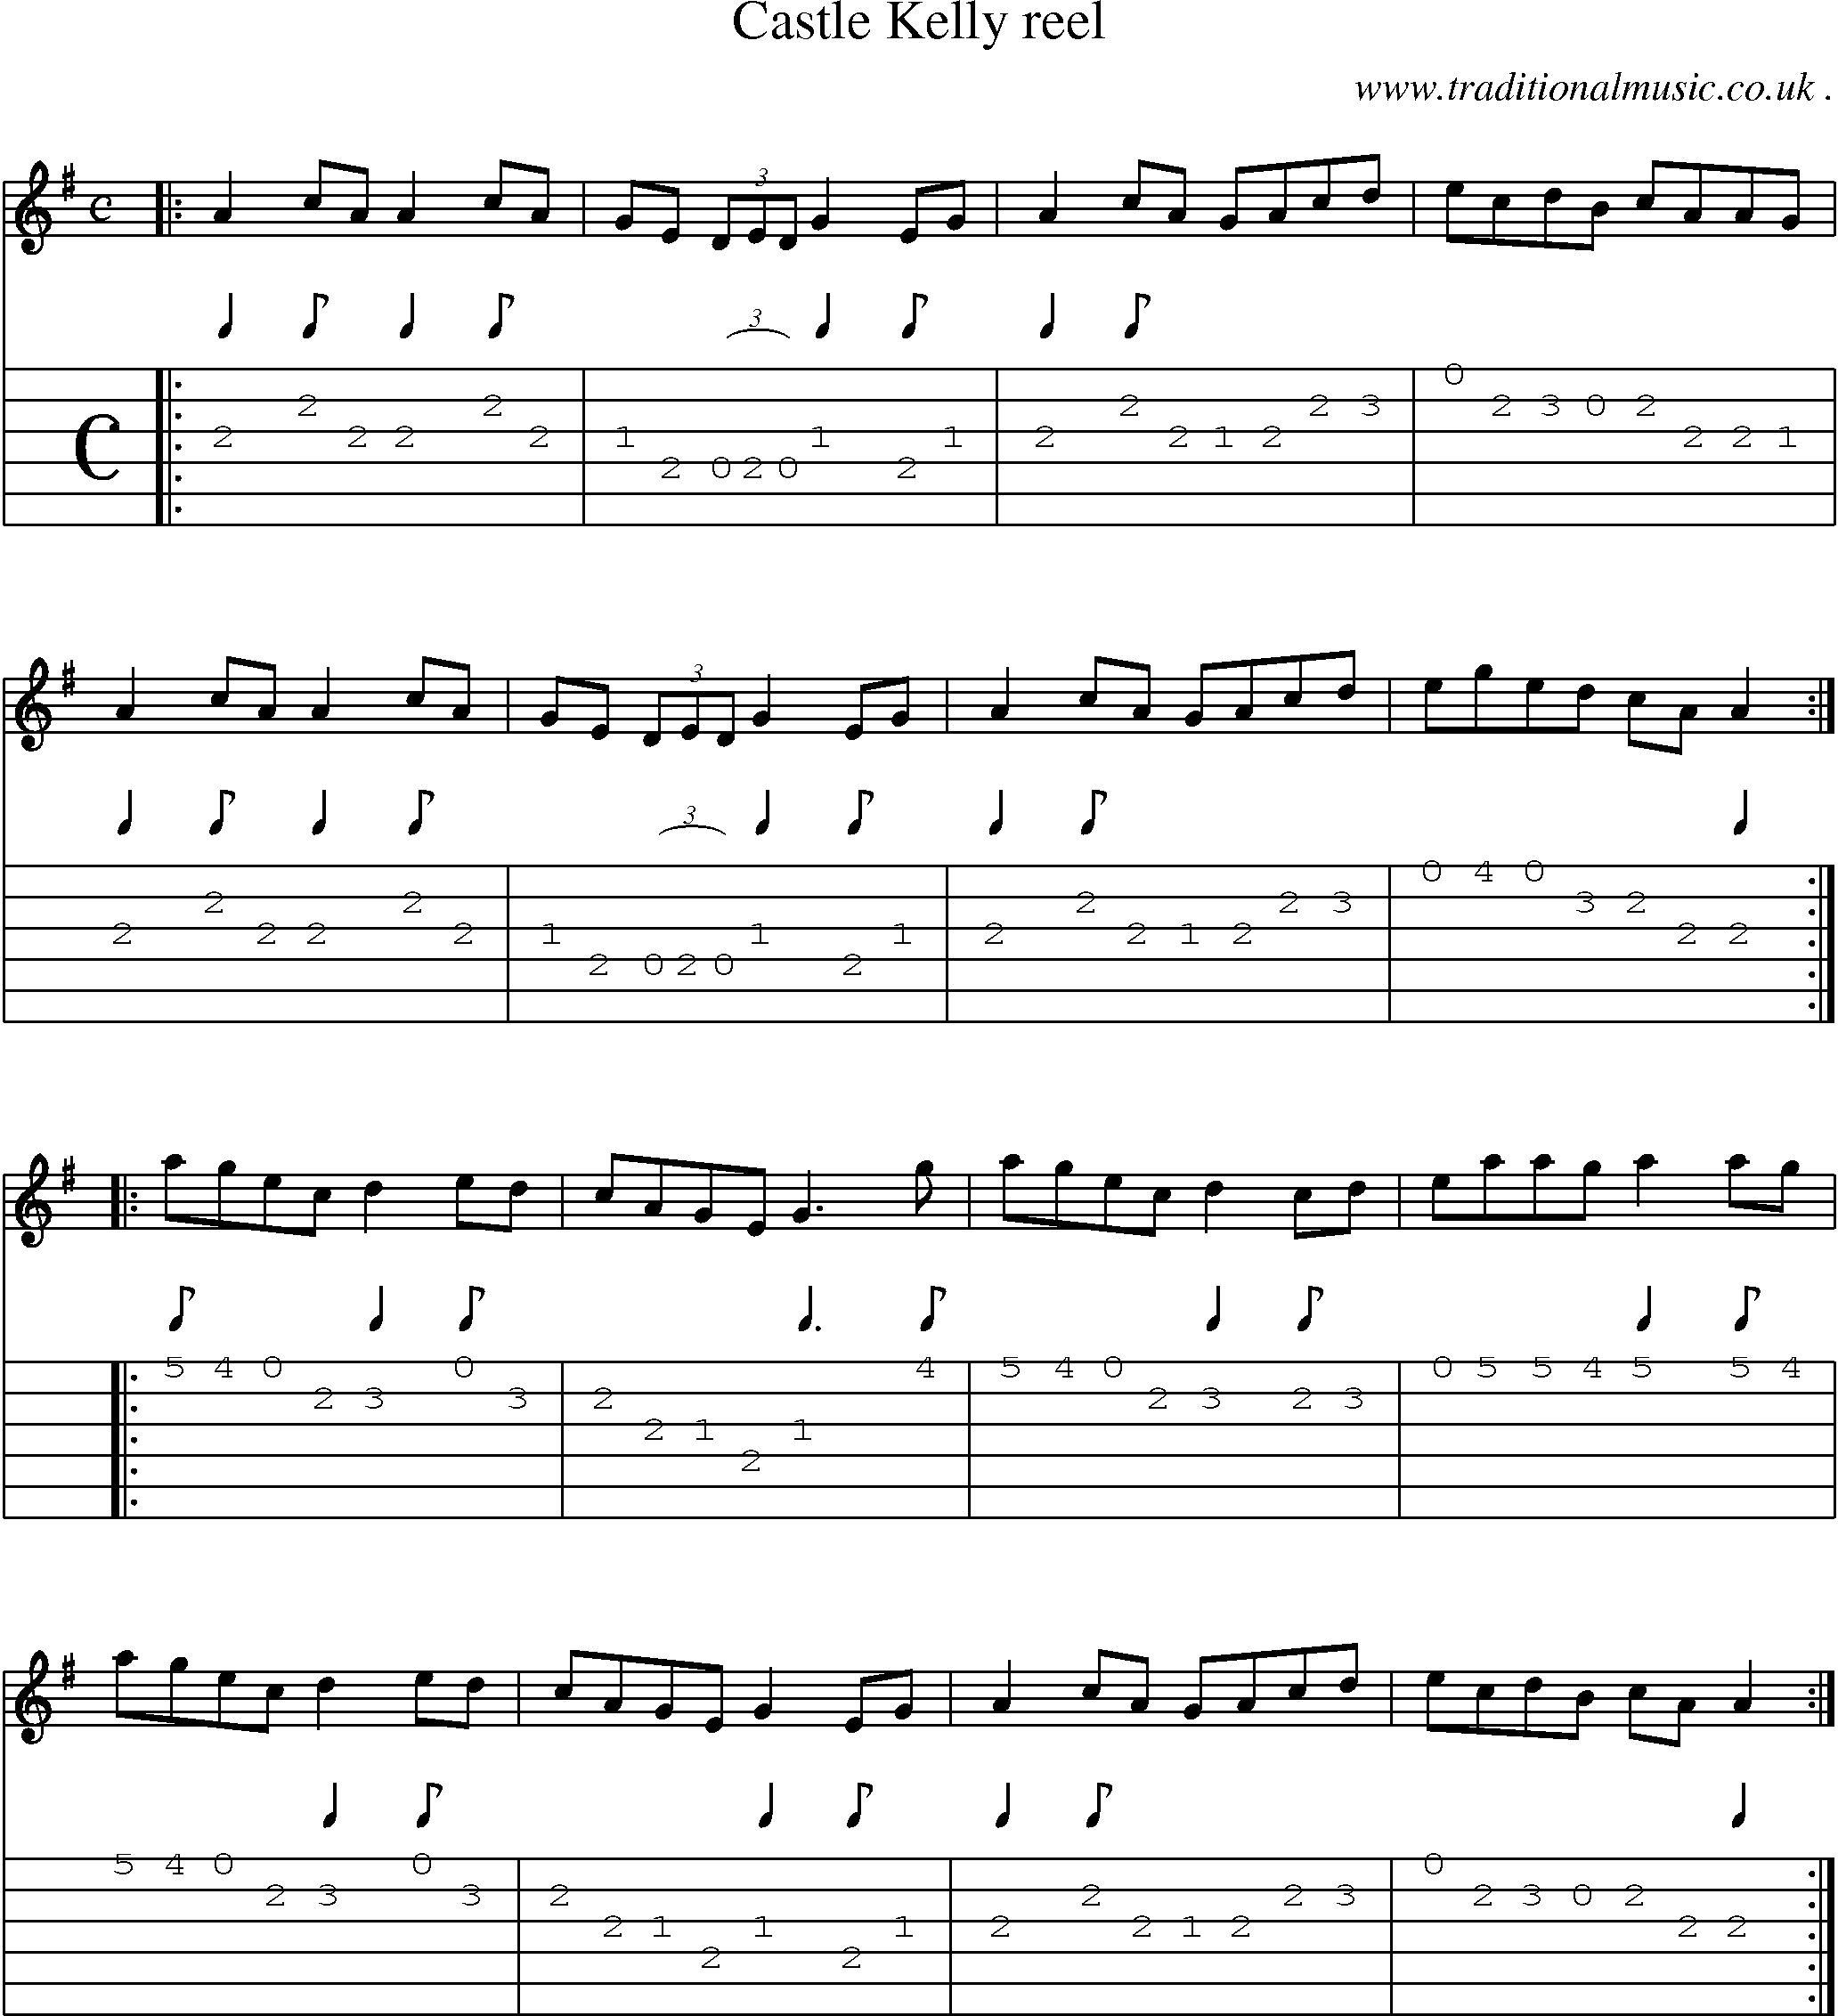 Sheet-Music and Guitar Tabs for Castle Kelly Reel